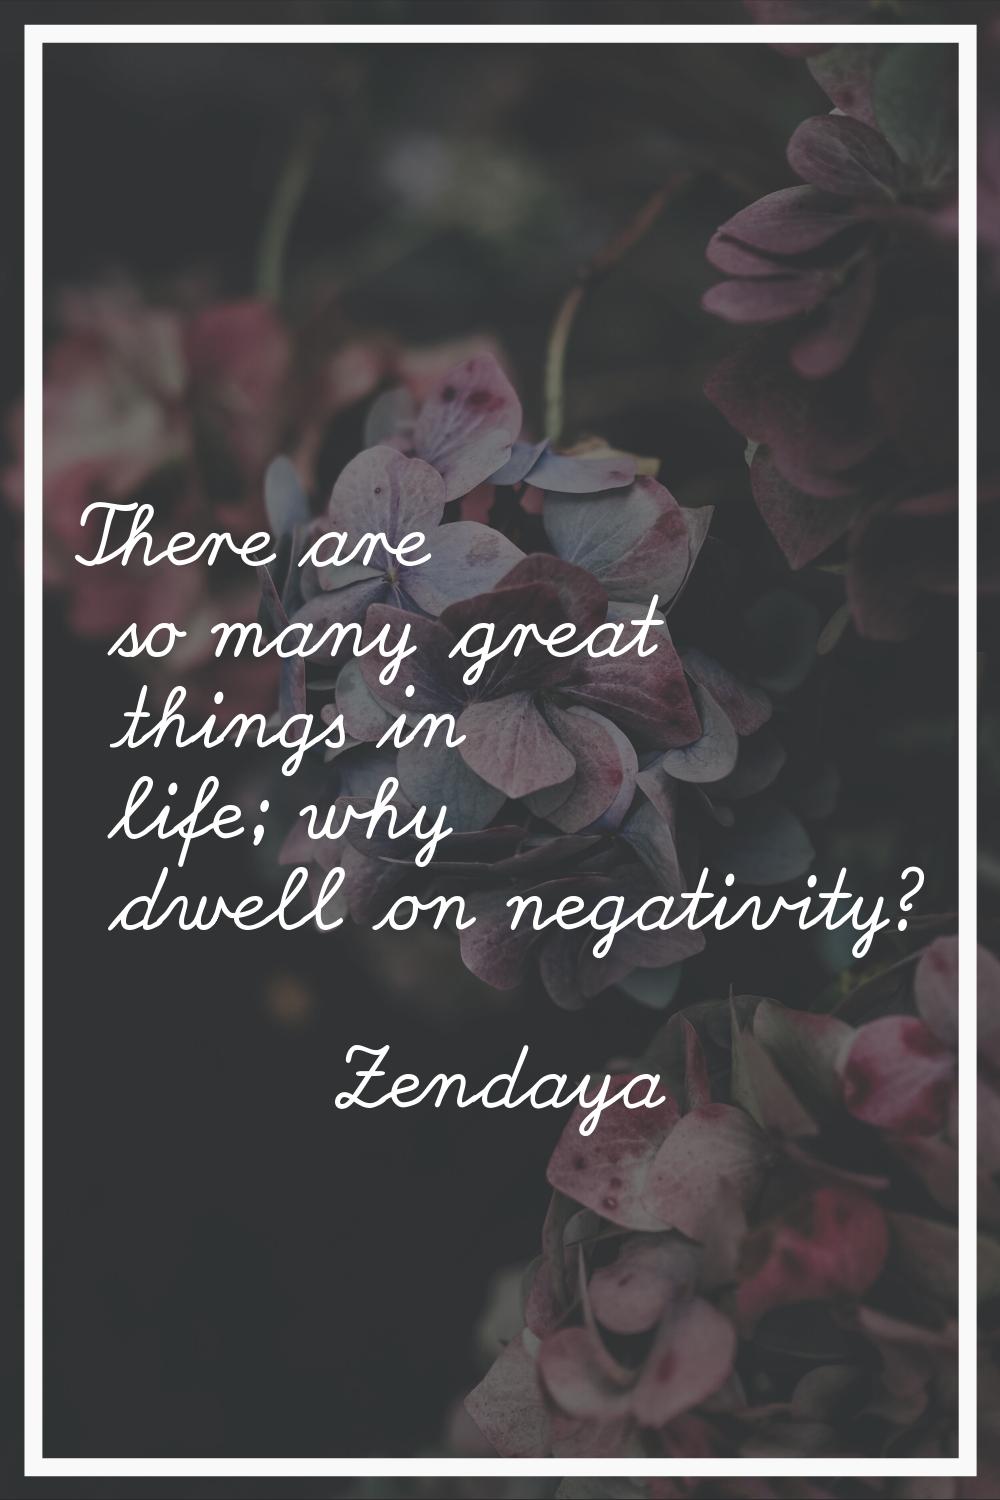 There are so many great things in life; why dwell on negativity?